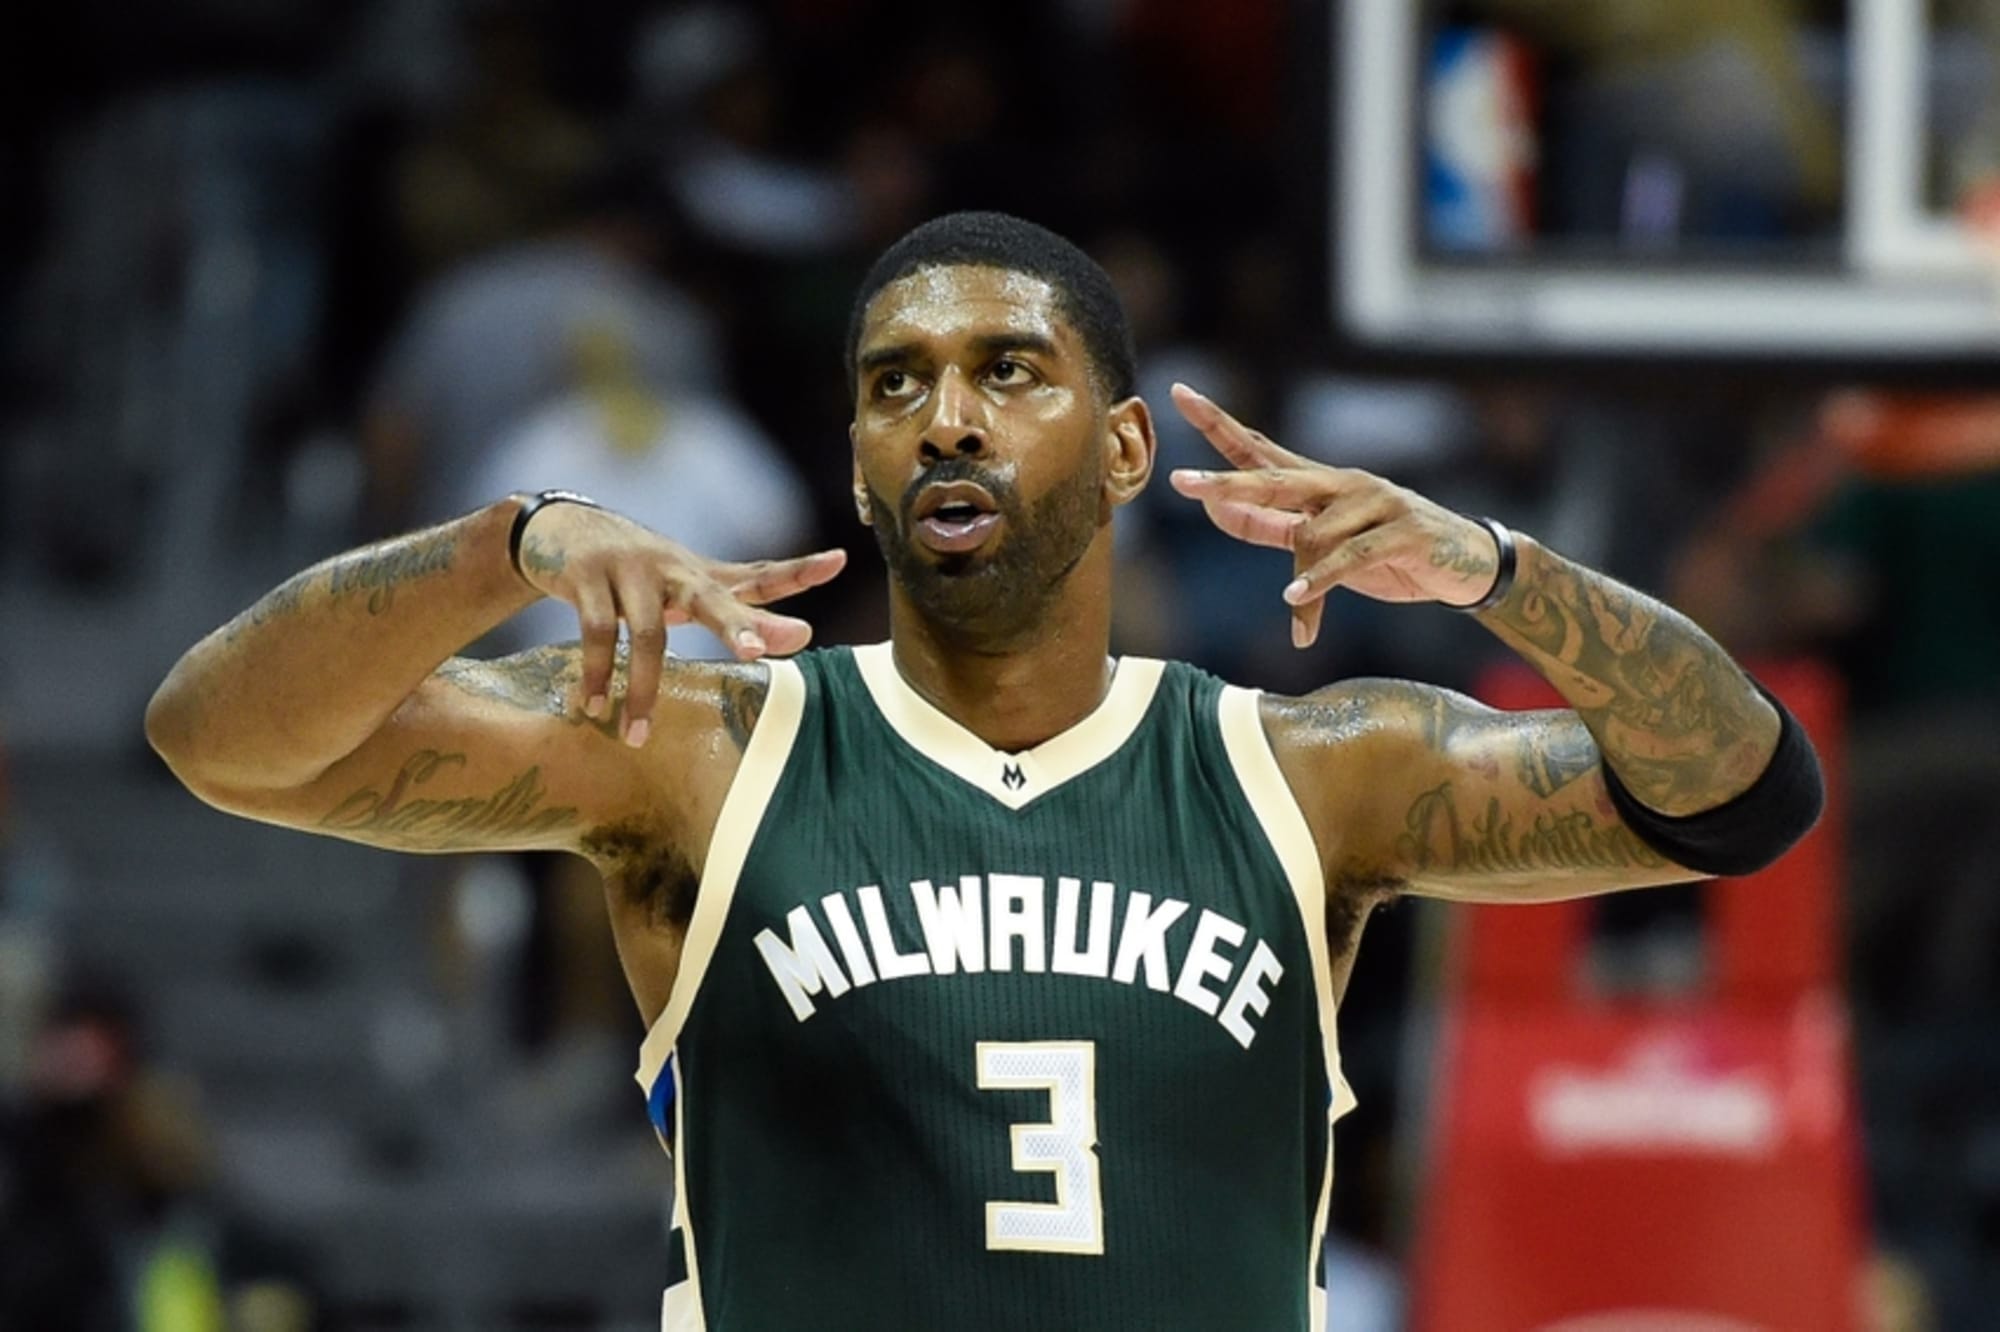 O.J. Mayo Disqualified From NBA For Two Years For Drug Use